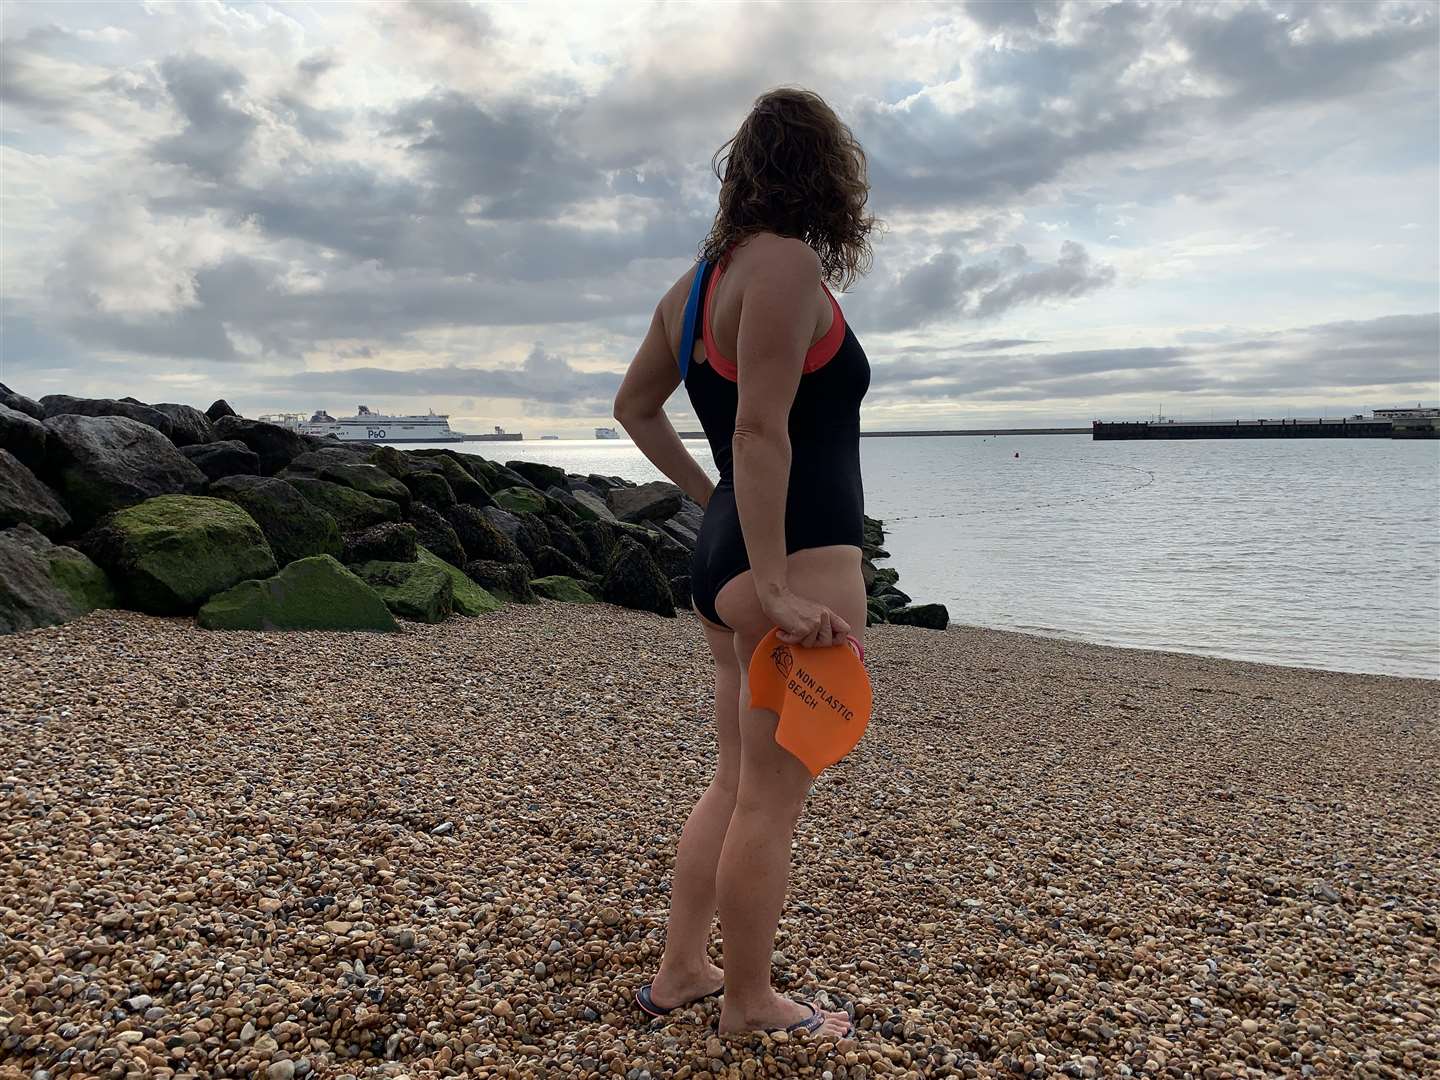 Channel swimmer Sarah Philpott from Dover completed the first of three Triple Crown challenges in 2020